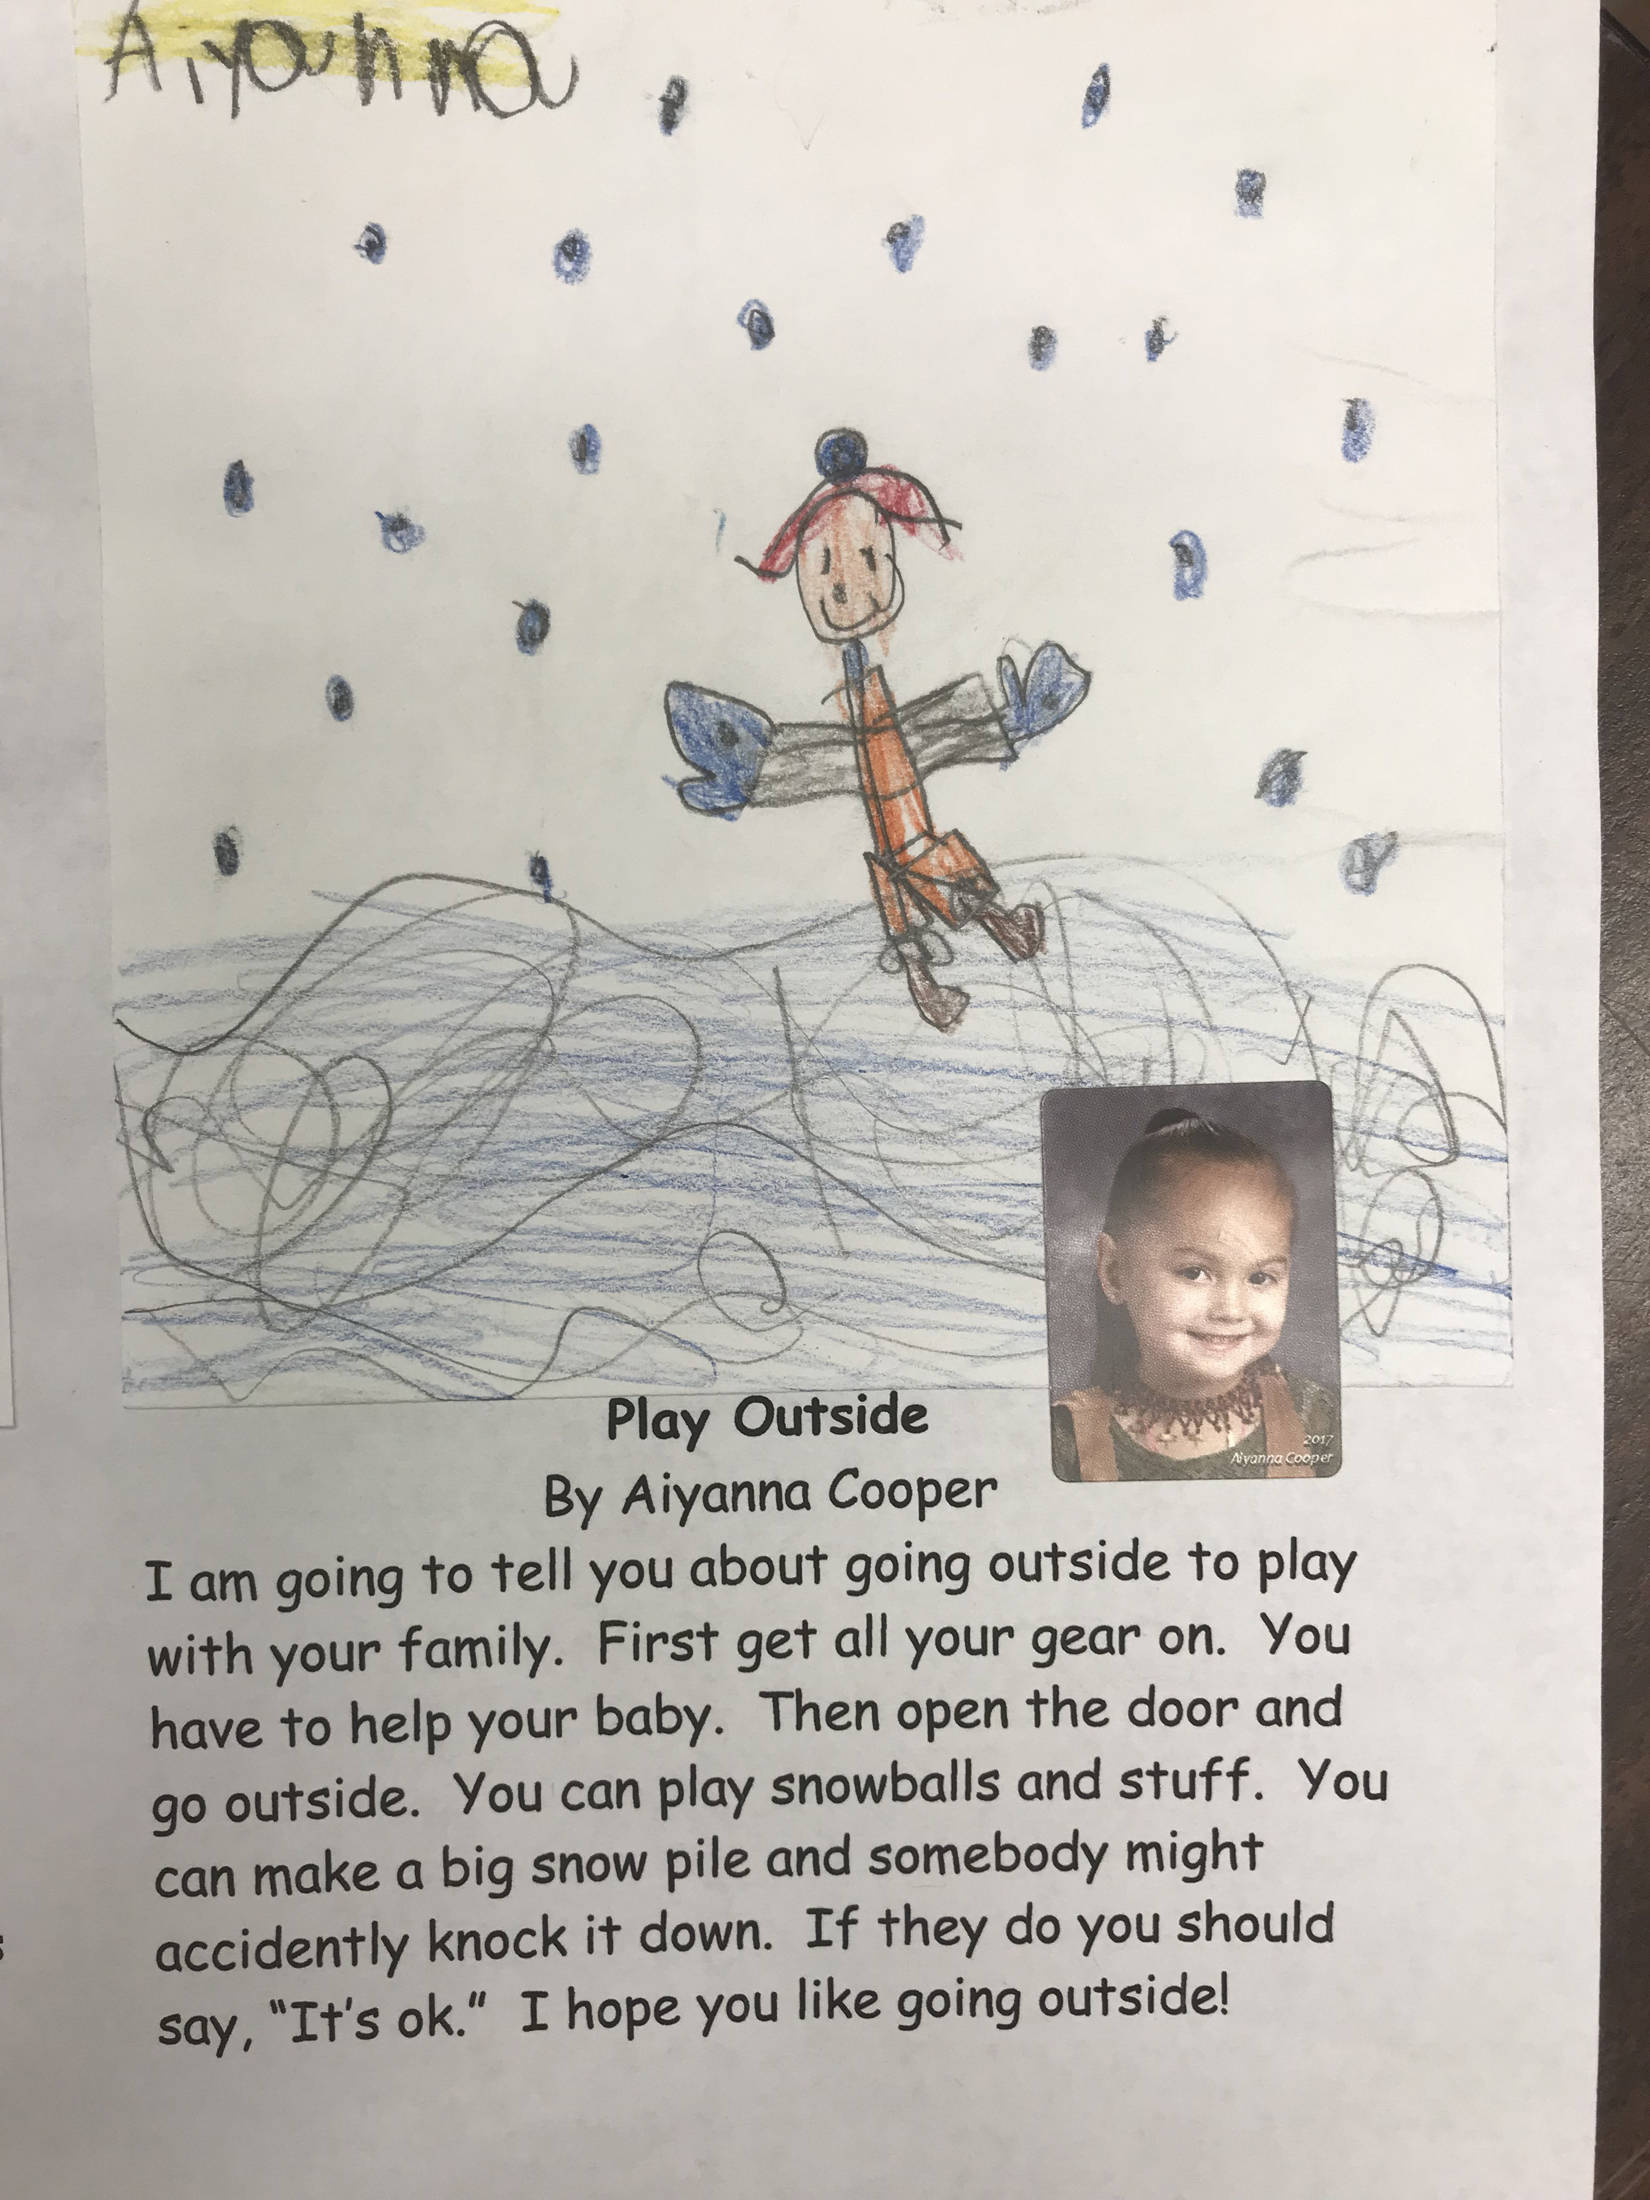 This holiday instruction made by Aiyanna Cooper is part of an 18-page “How to Get Ready for the Holidays” book created by the students of Jennifer Reinhart’s kindergarten class. (Photo courtesy Jennifer Reinhart)